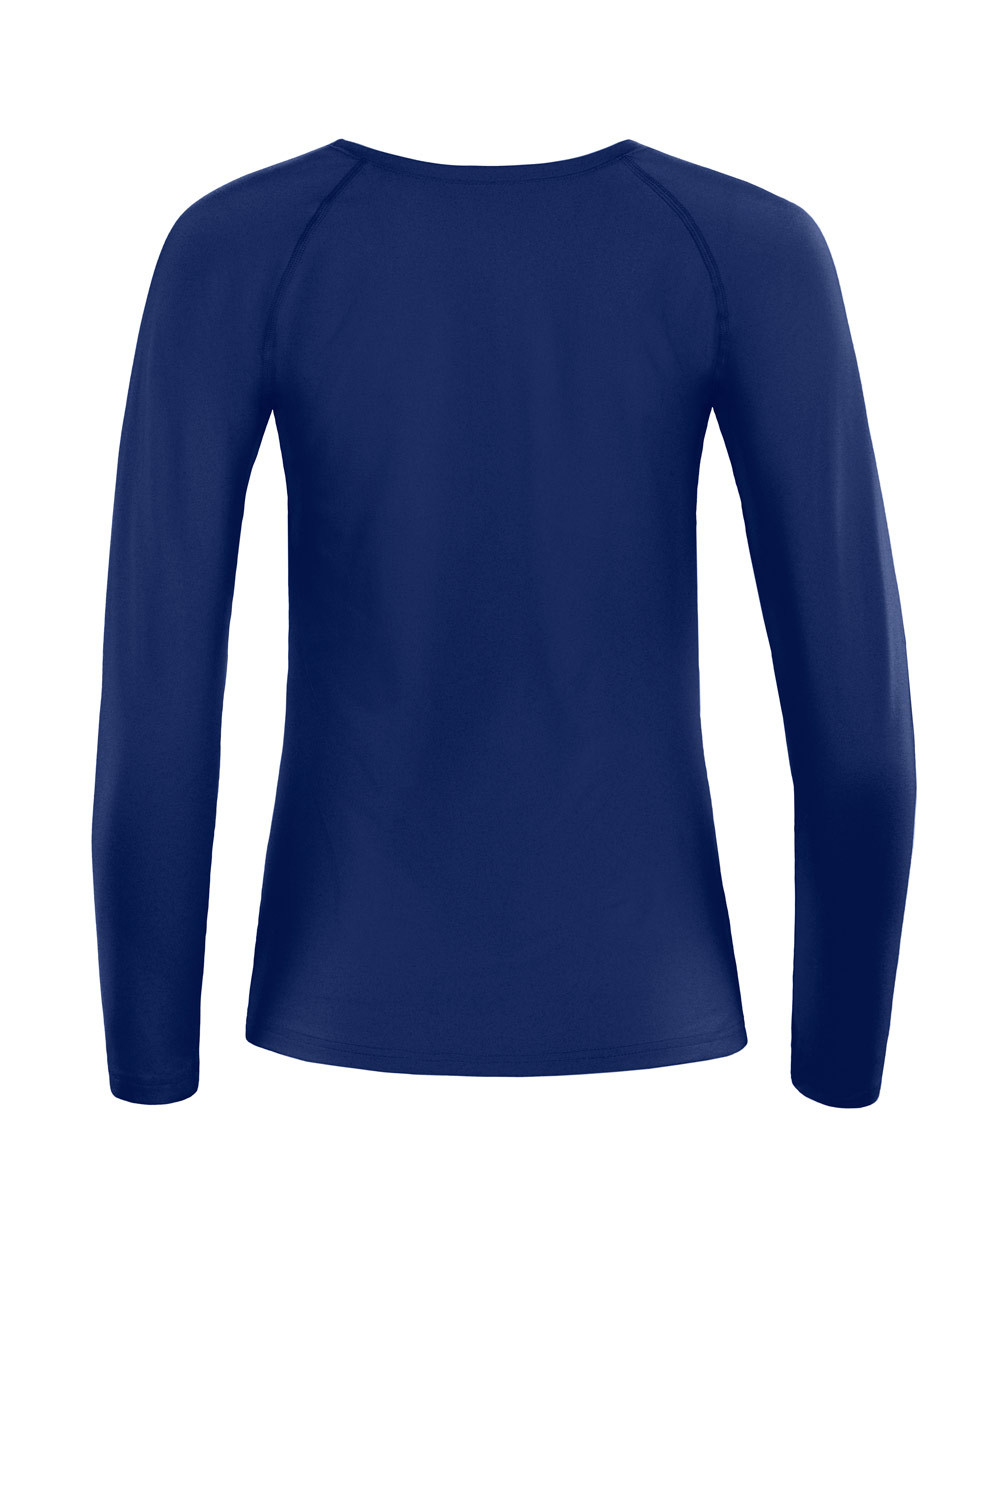 Functional Light and Ultra Top Style Soft Long AET118LS, Winshape Sleeve blue, dark Soft